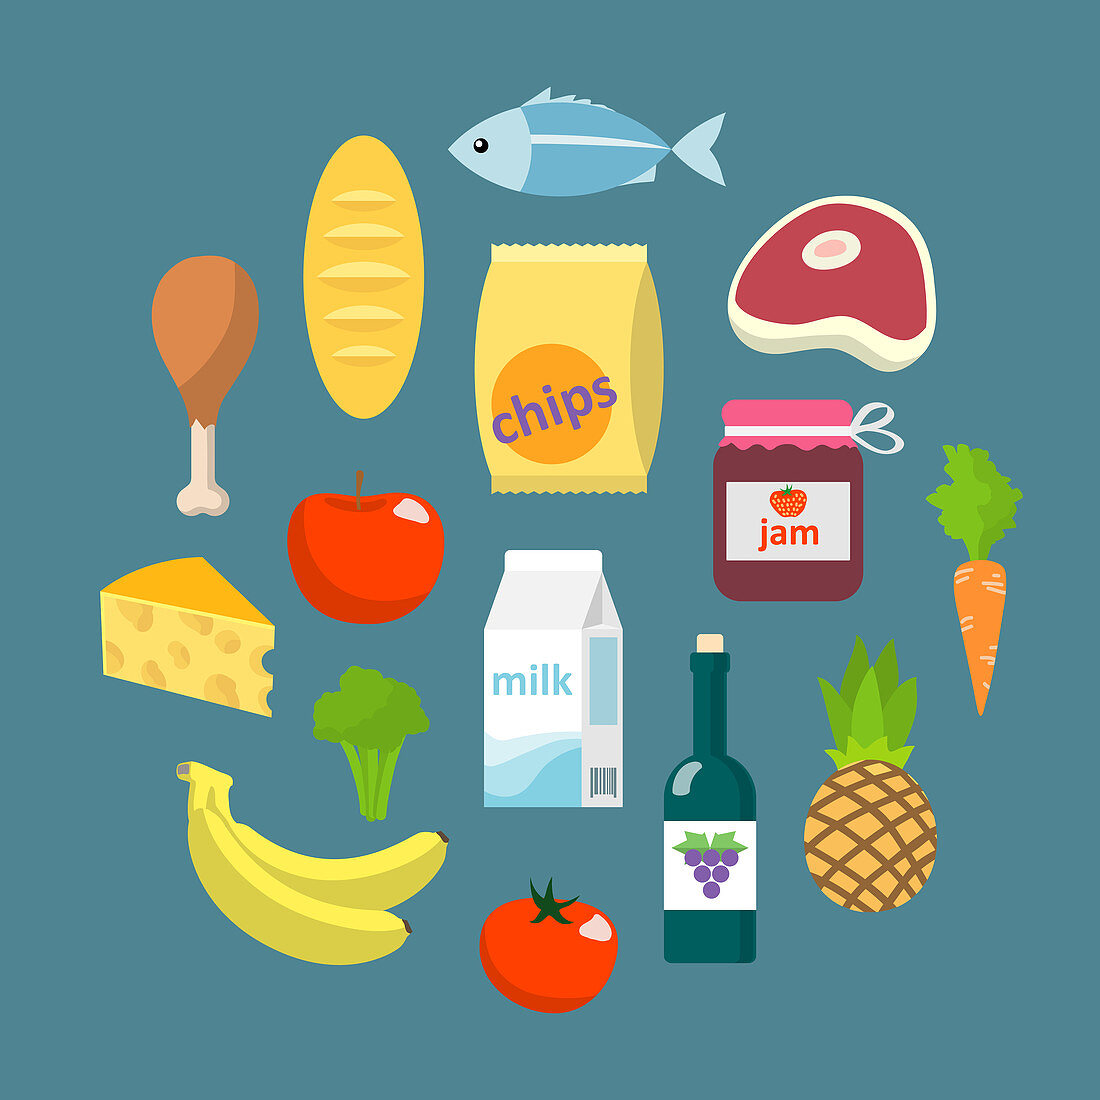 Food and drink icons, illustration